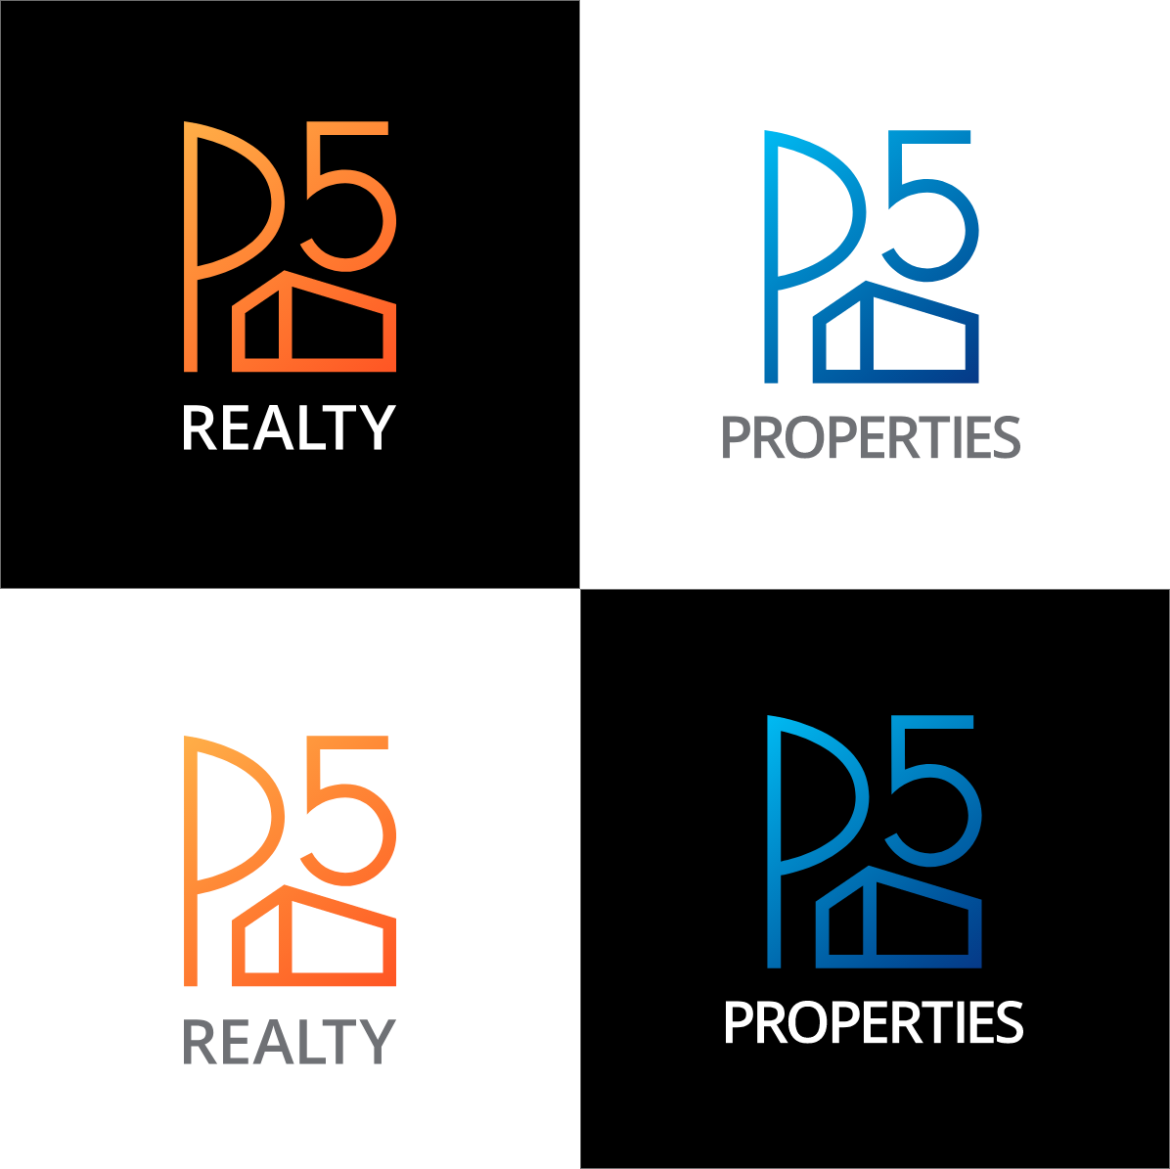 P5 logo in various versions, including blue, orange, and reversed